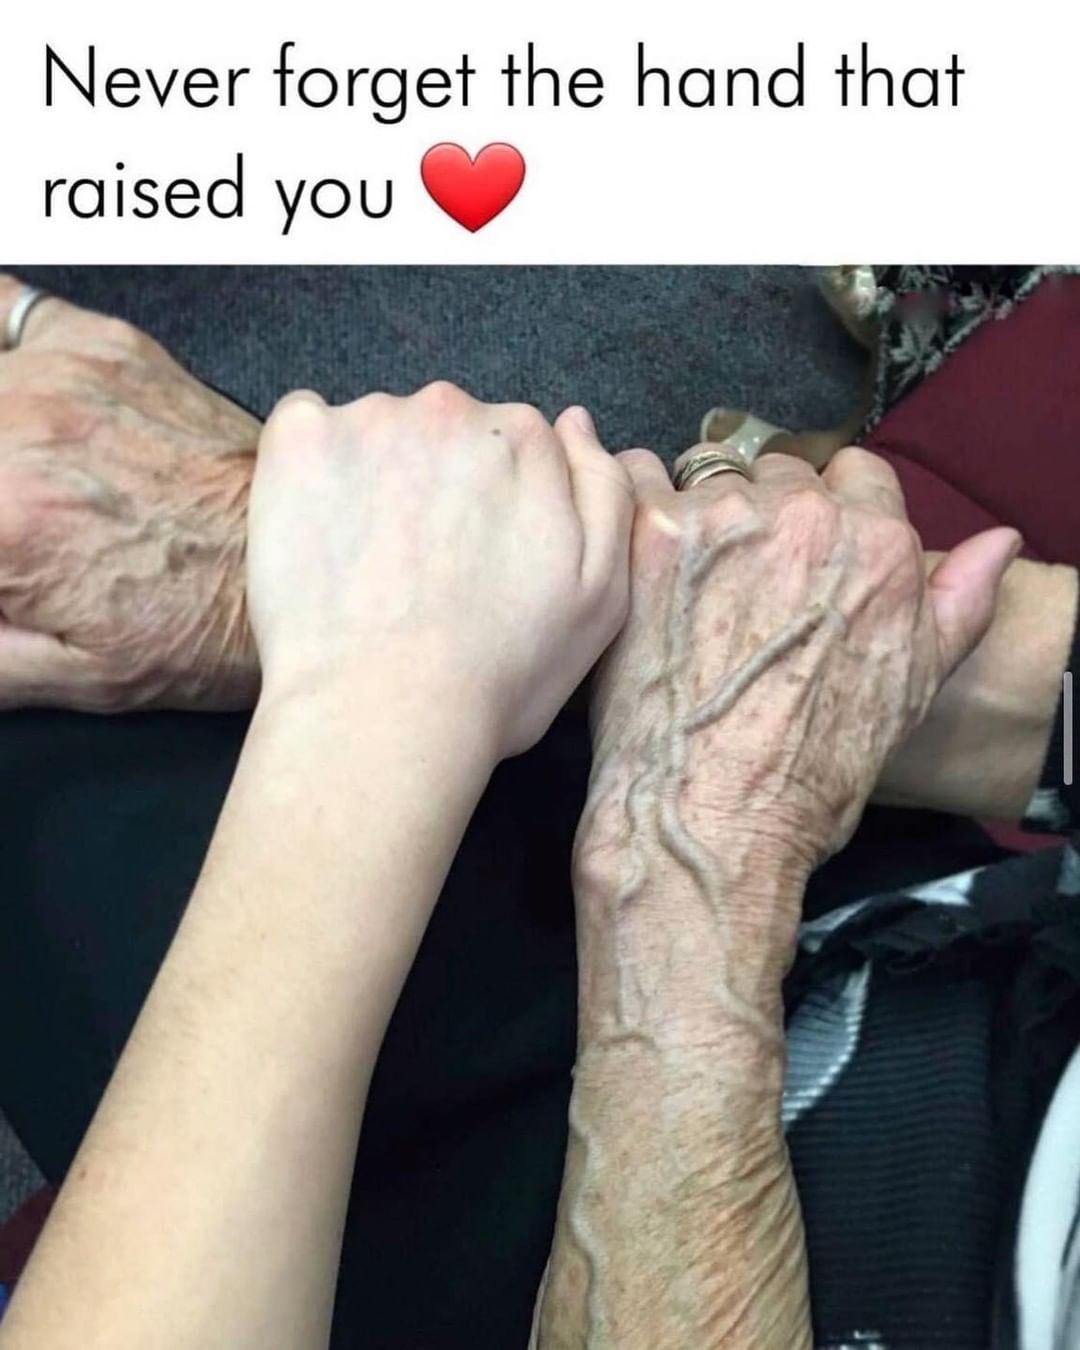 Never forget the hand that raised you.